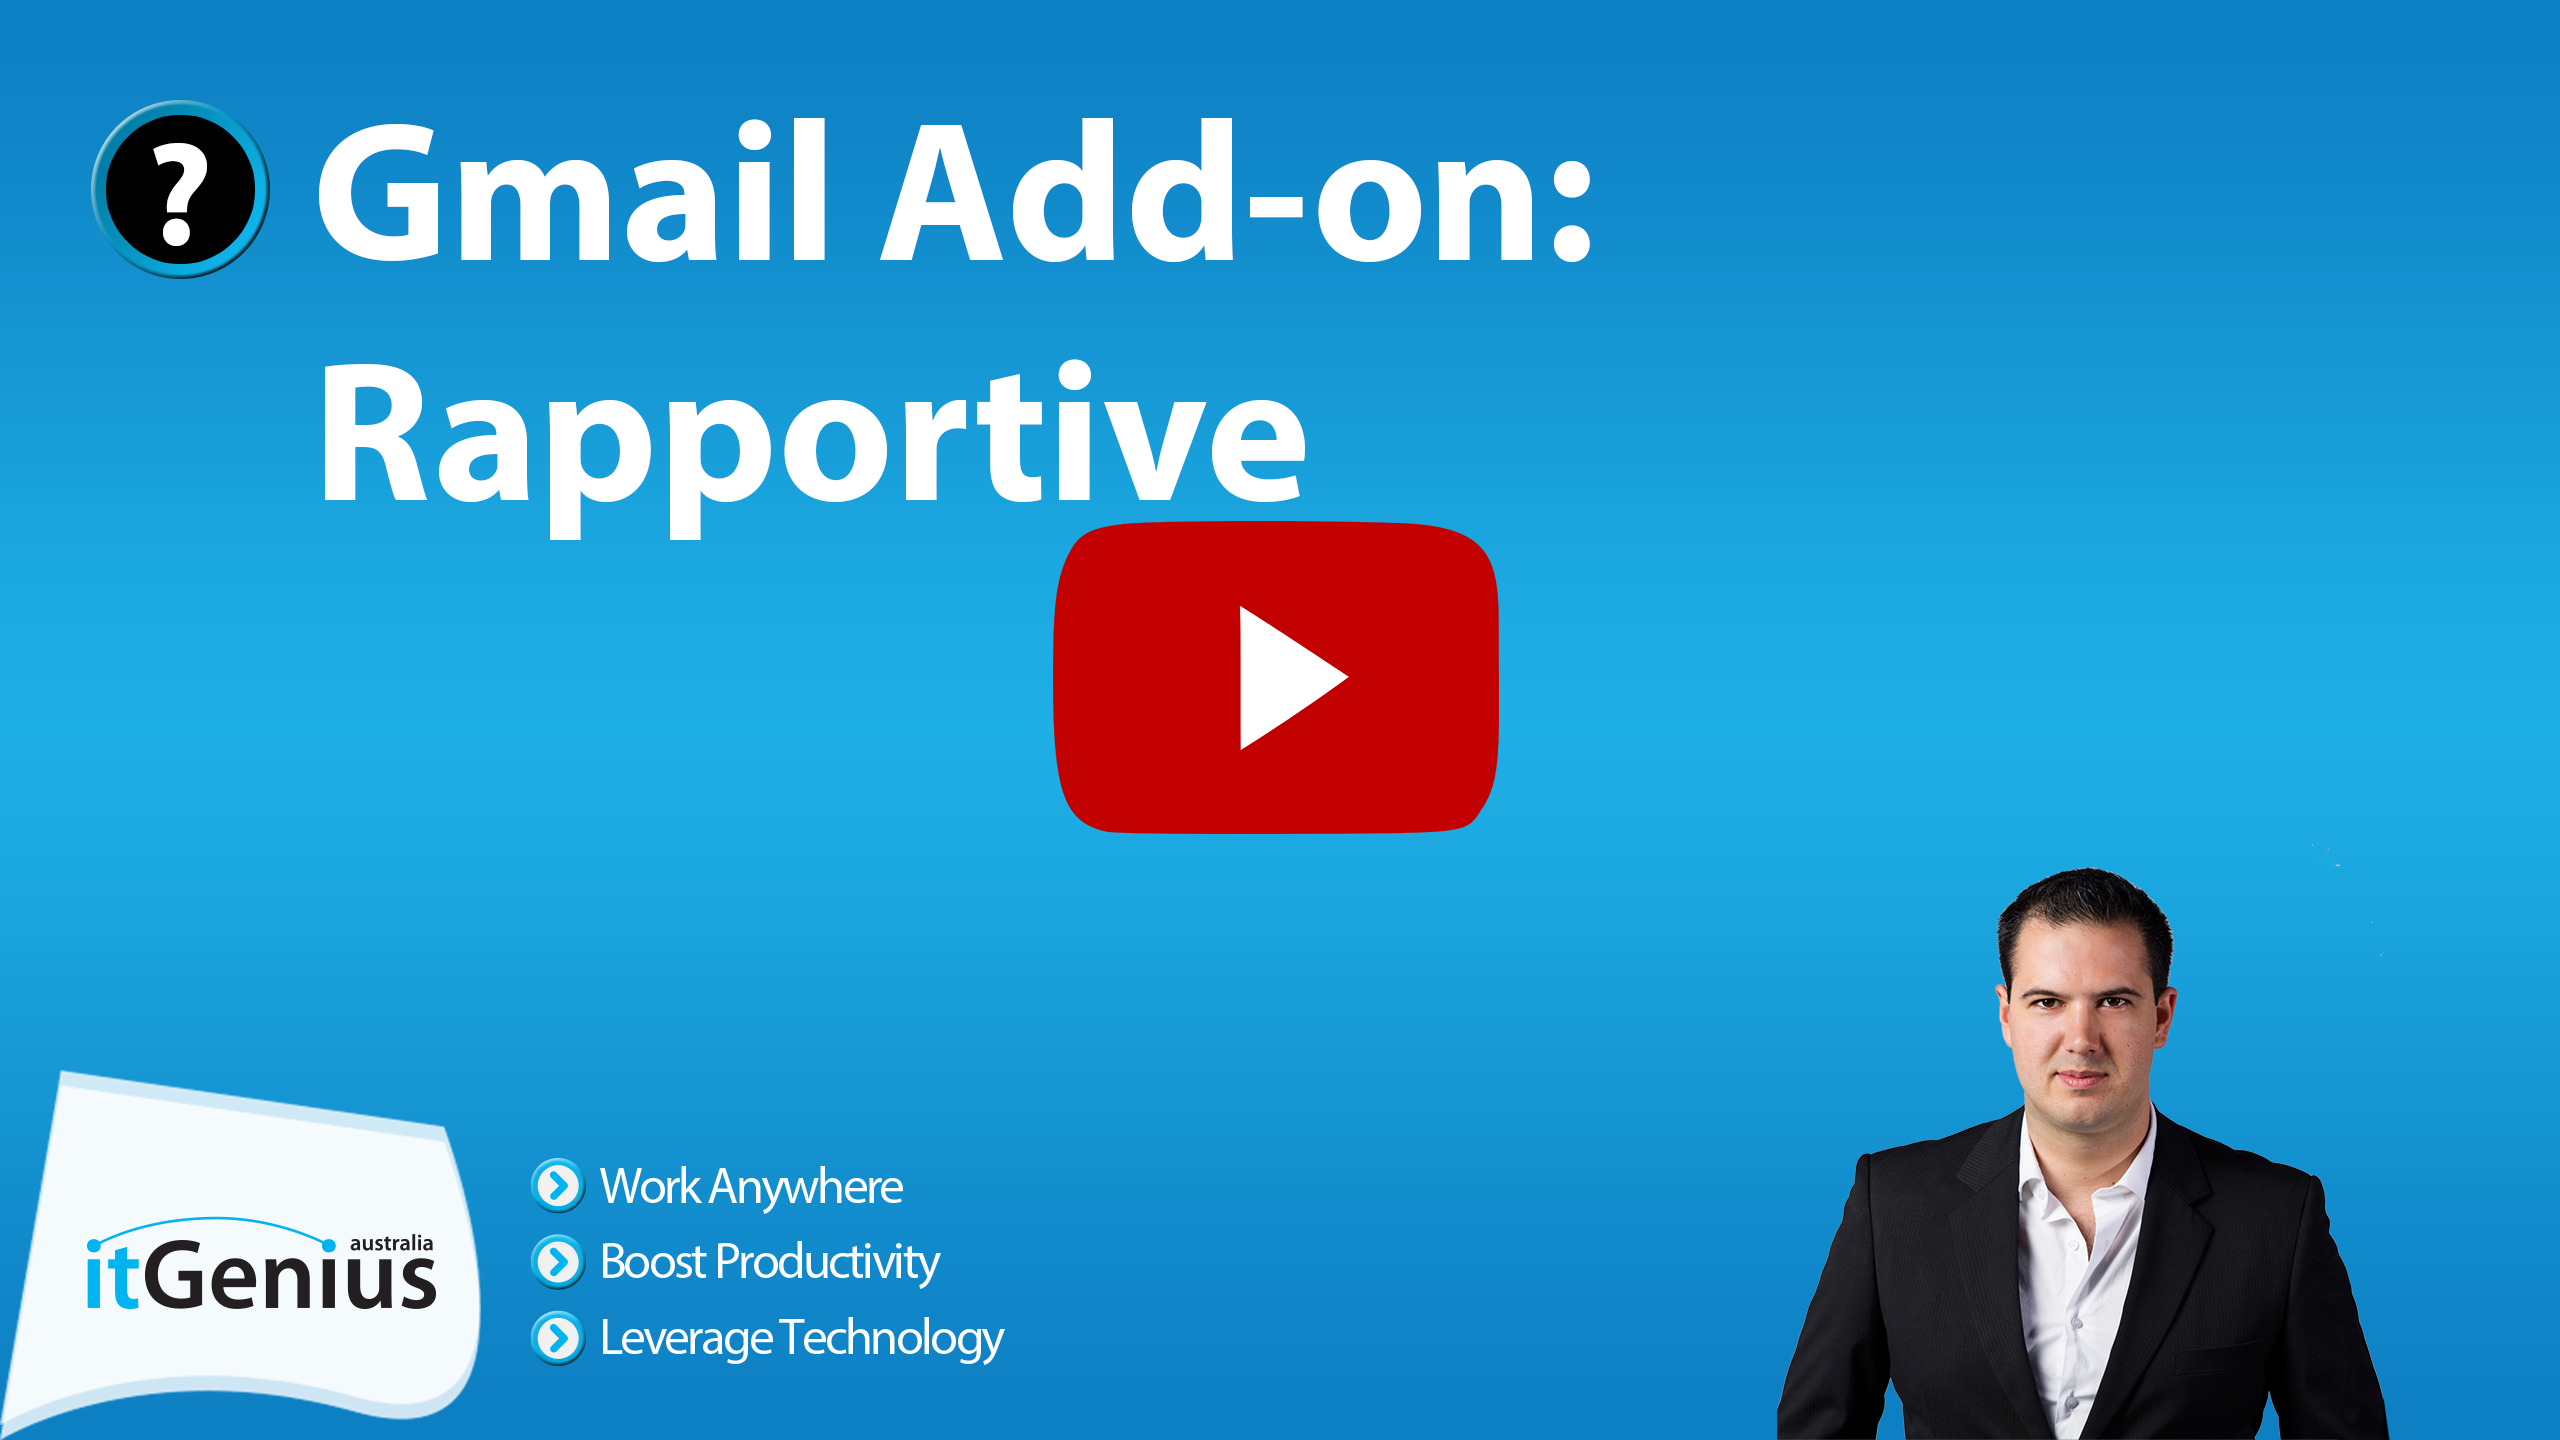 Gmail Add-on: Rapportive